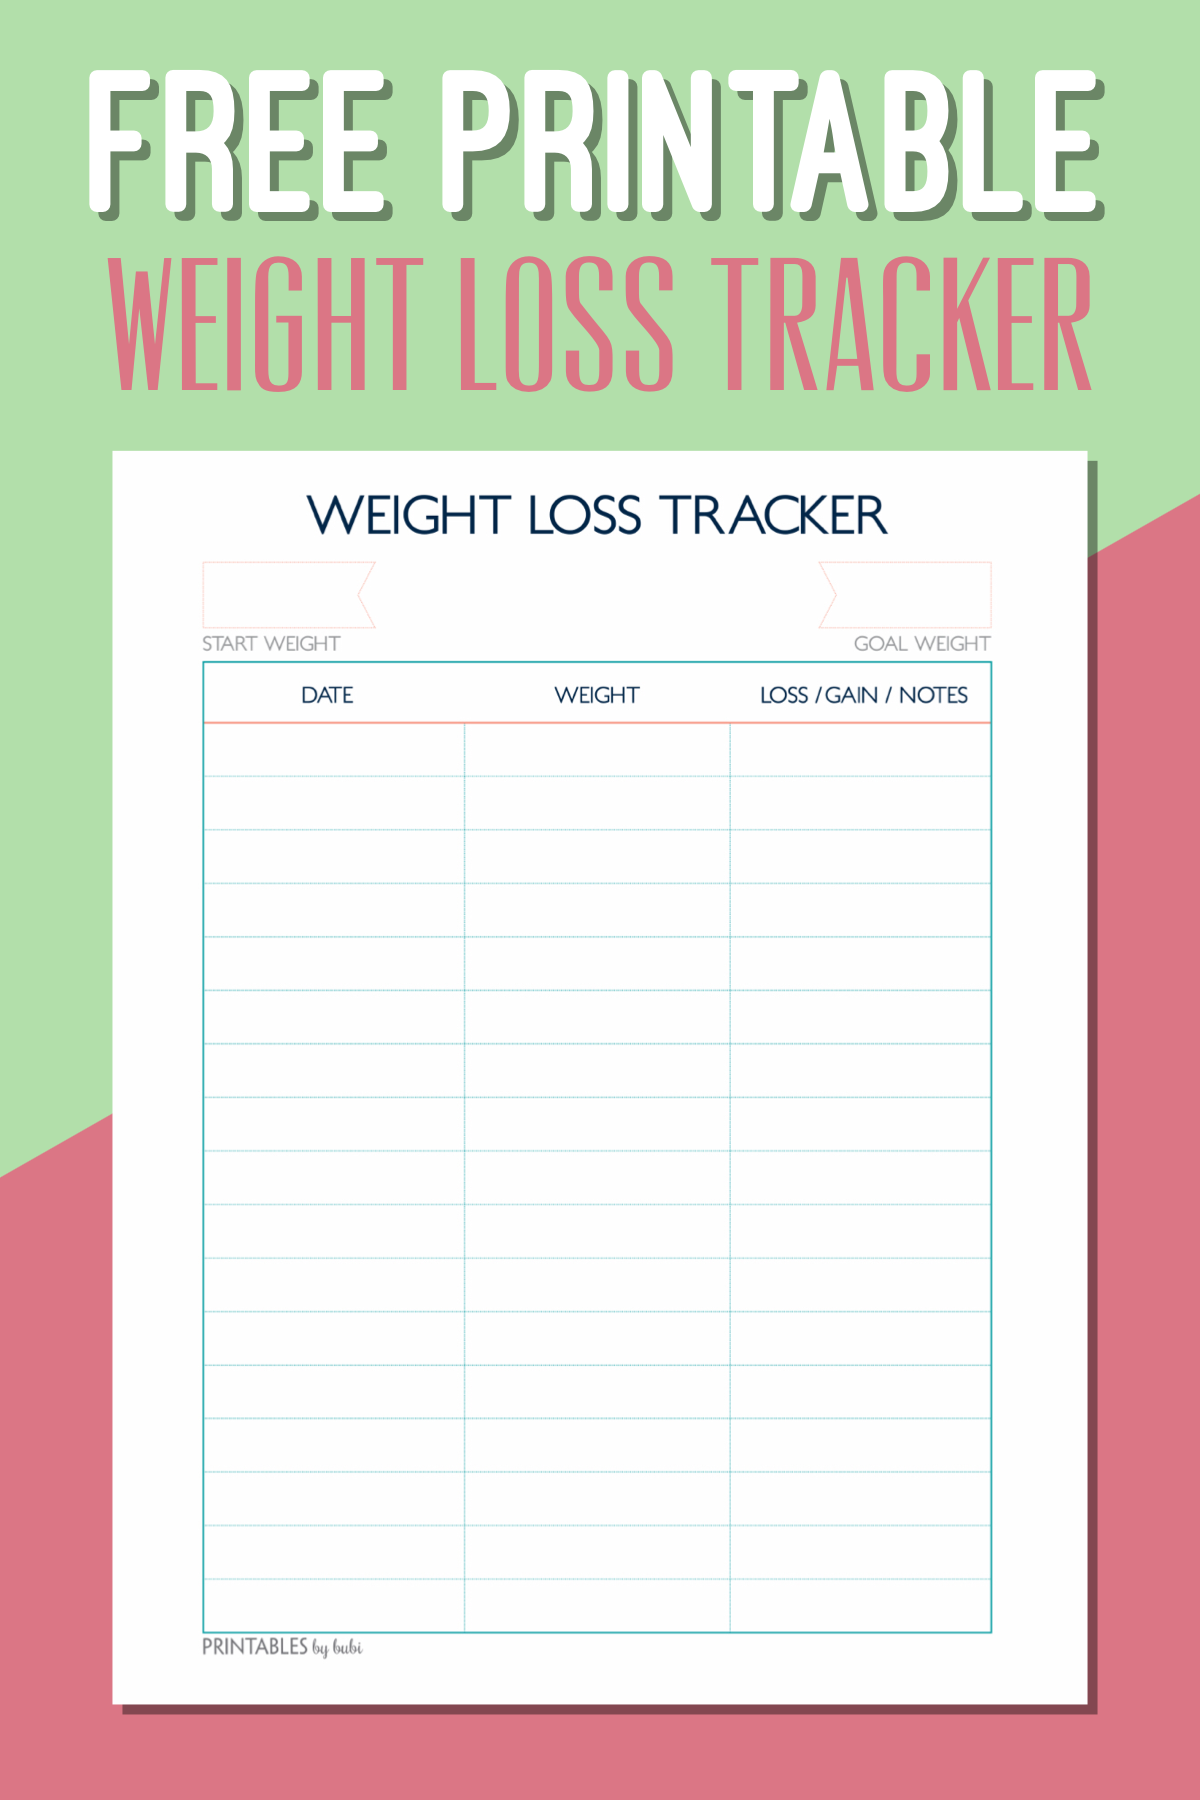 Free Printable Weight Loss Tracker – Instant Download PDF 